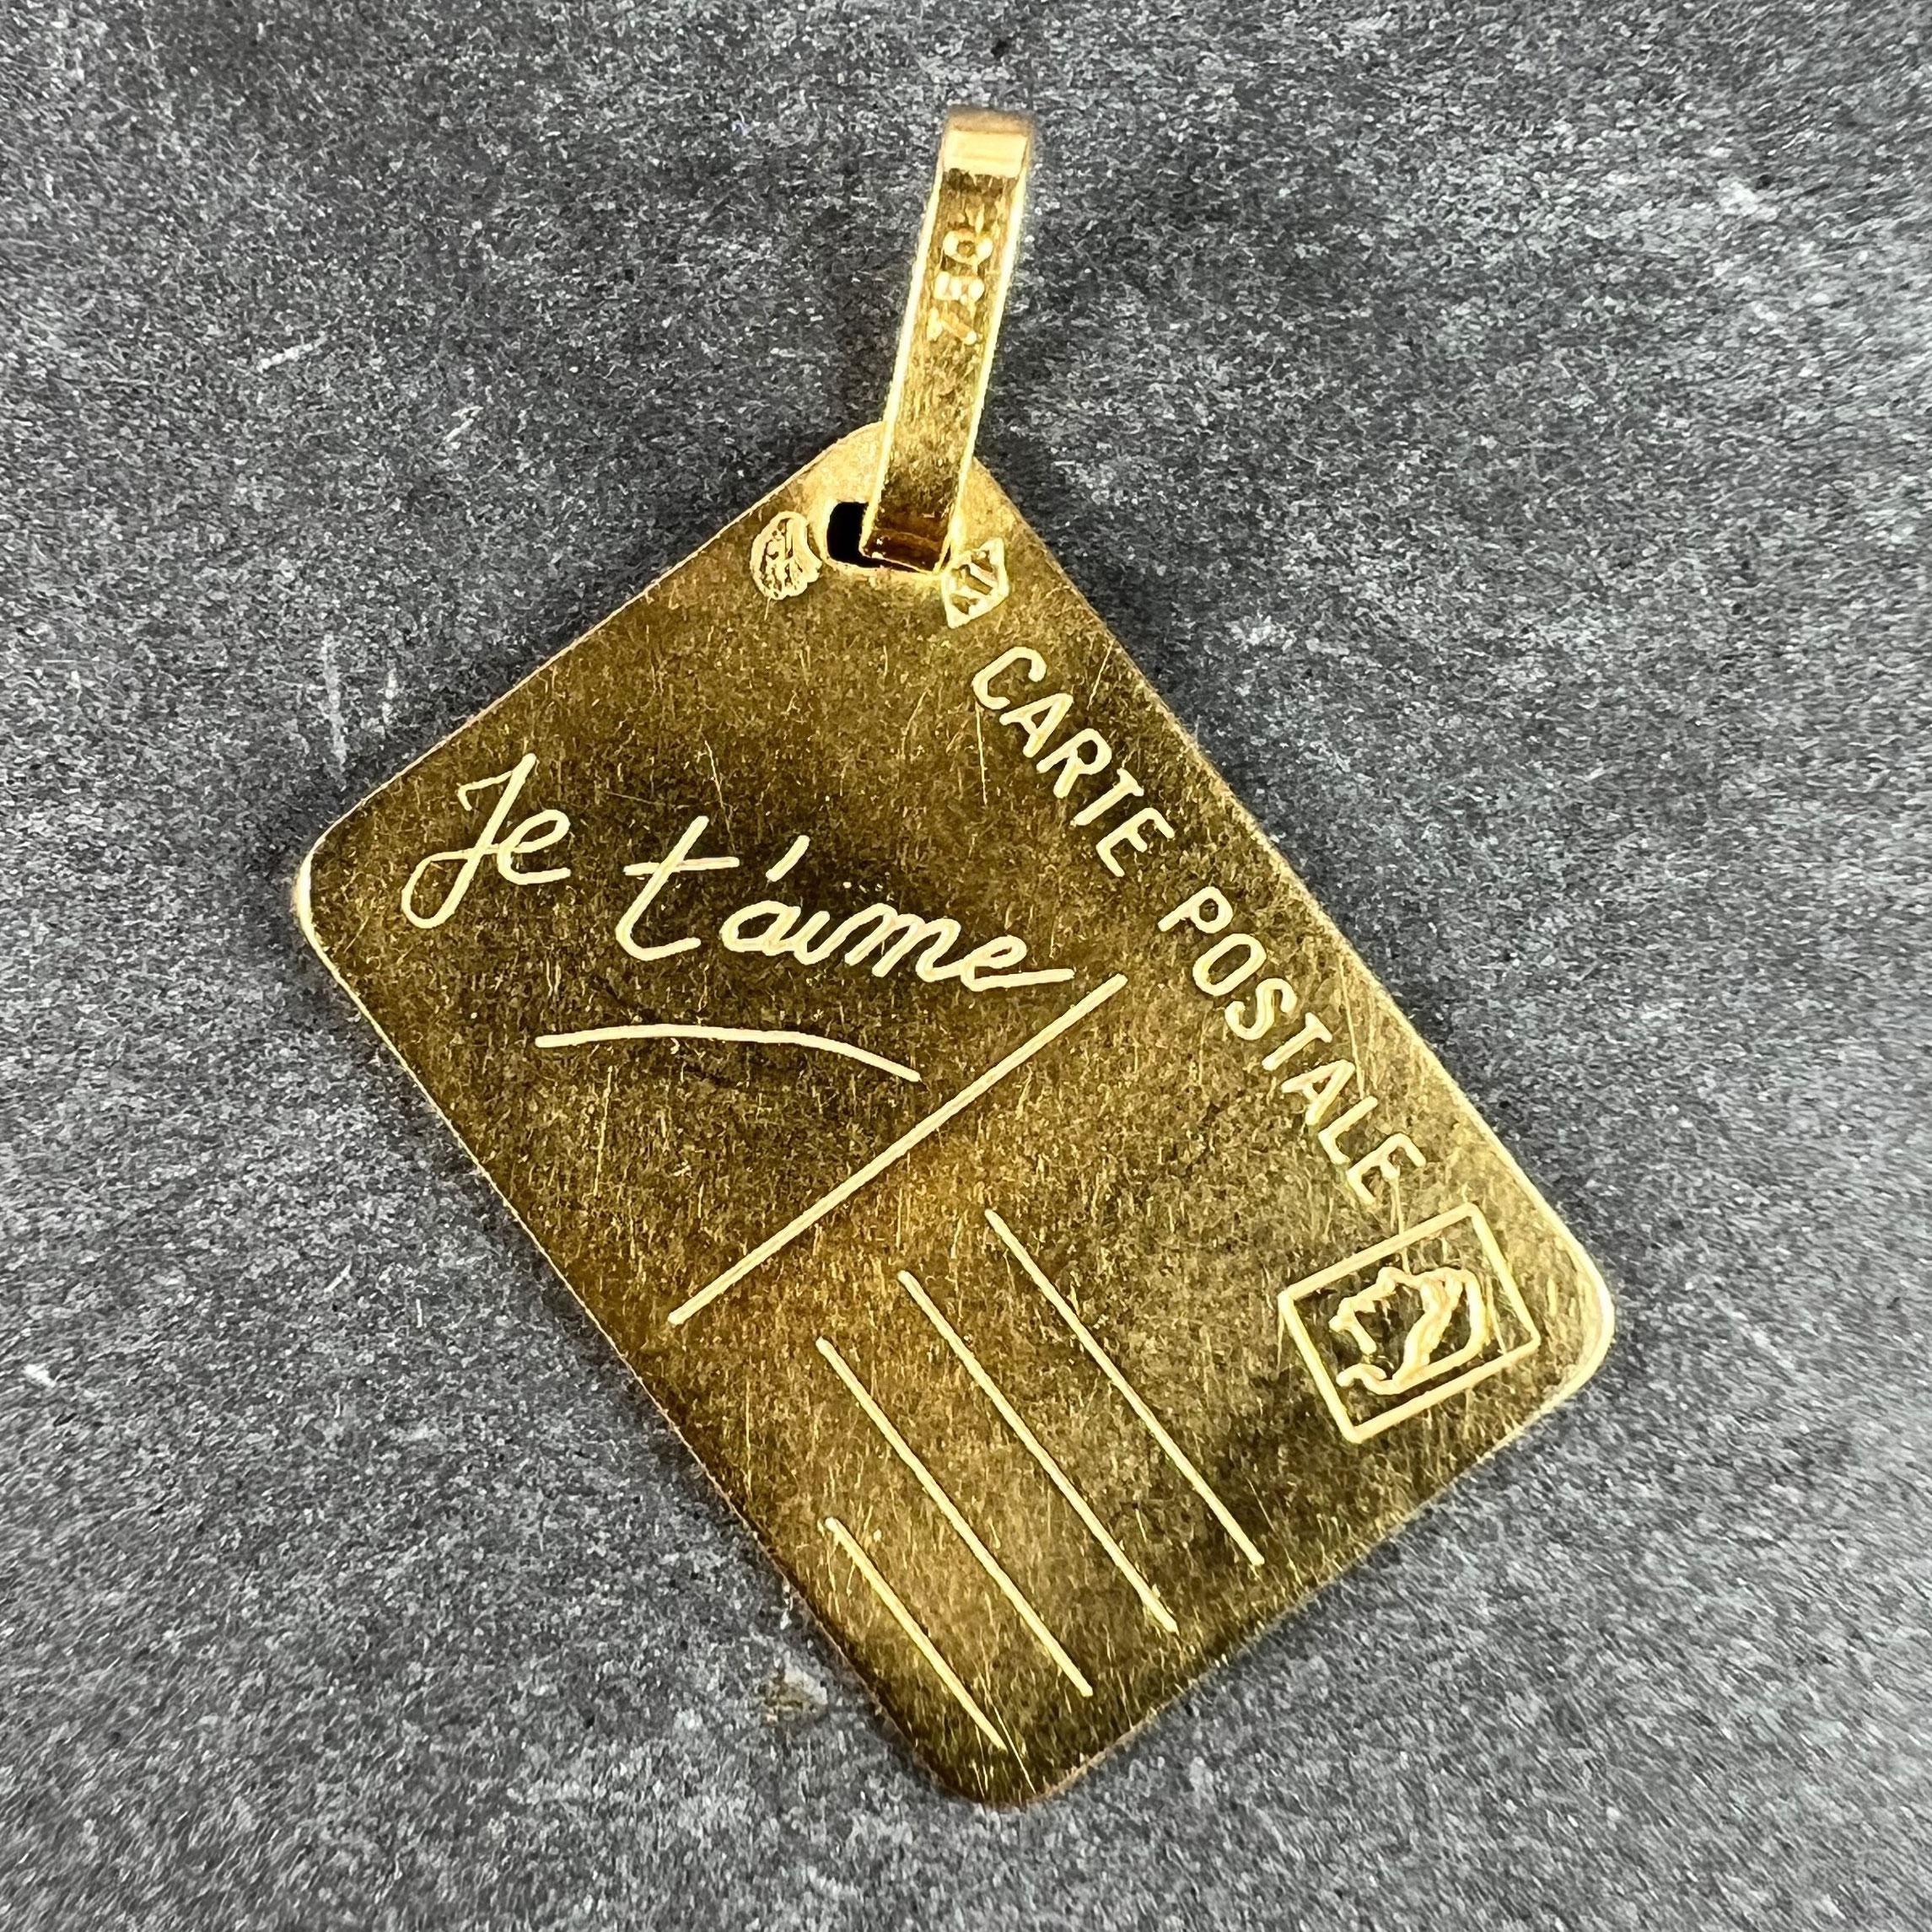 A French 18 karat (18K) yellow gold love letter charm pendant designed as a postcard with blank address field, stamp and the words 'Je t'aime' in cursive to one field. Engraved 'Maman' (Mother) to the reverse.

Stamped with the eagle's head for